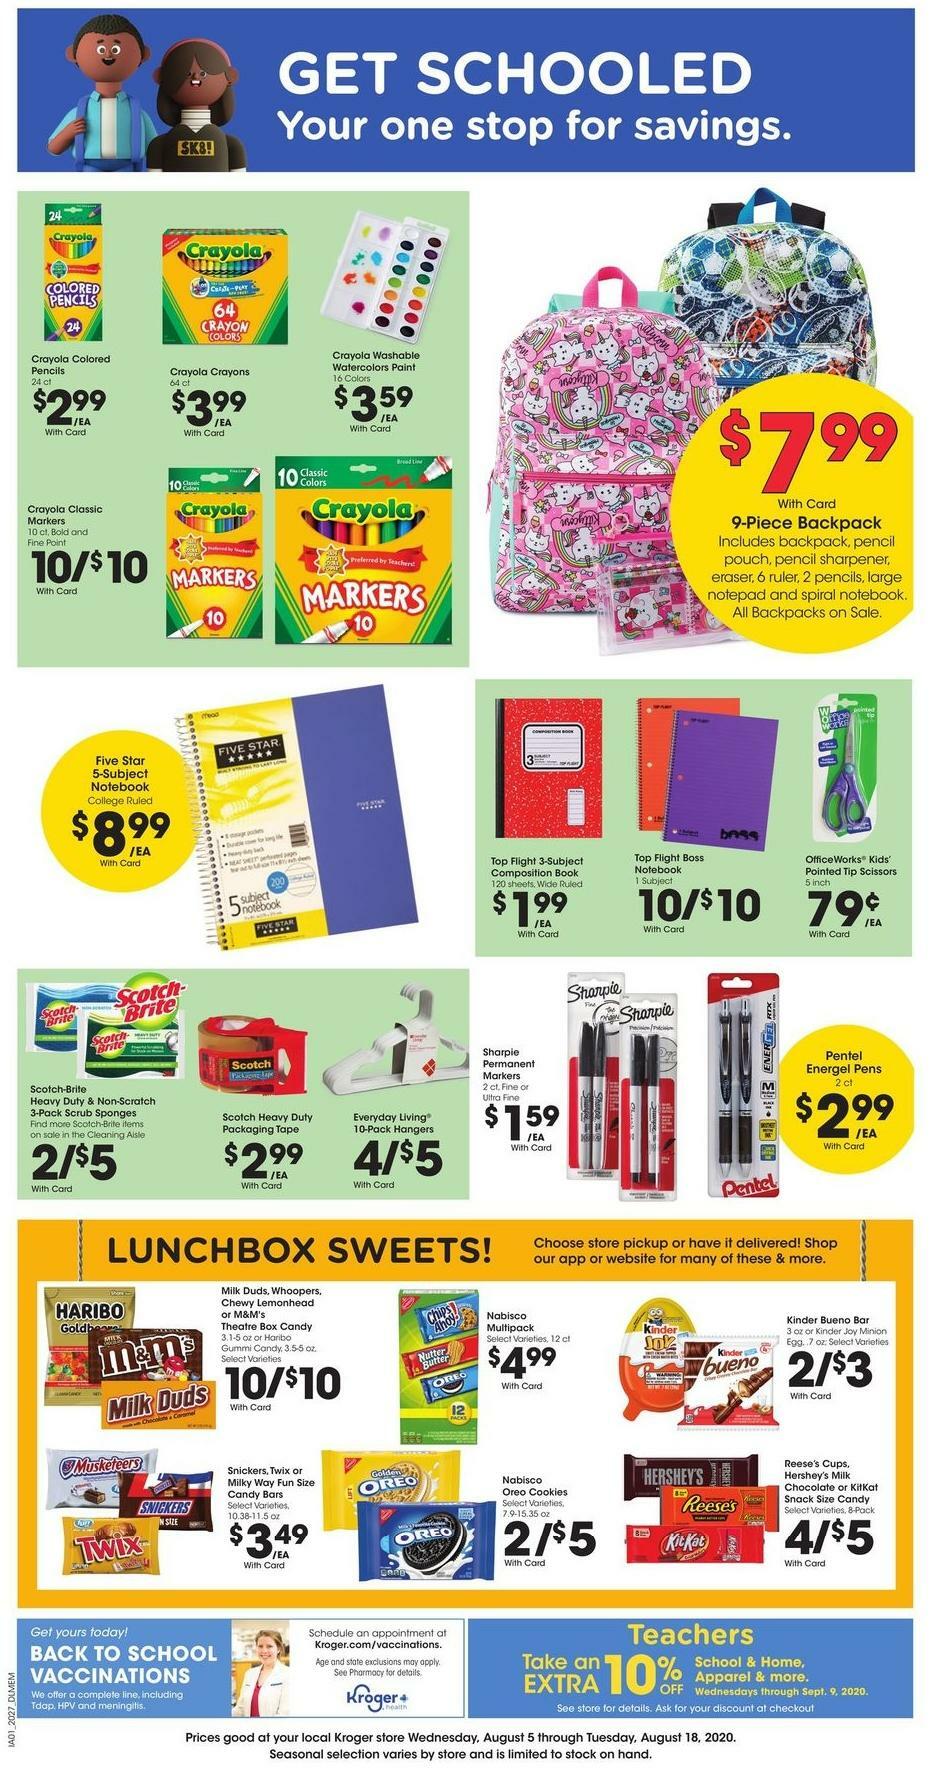 Kroger Weekly Ad from August 12